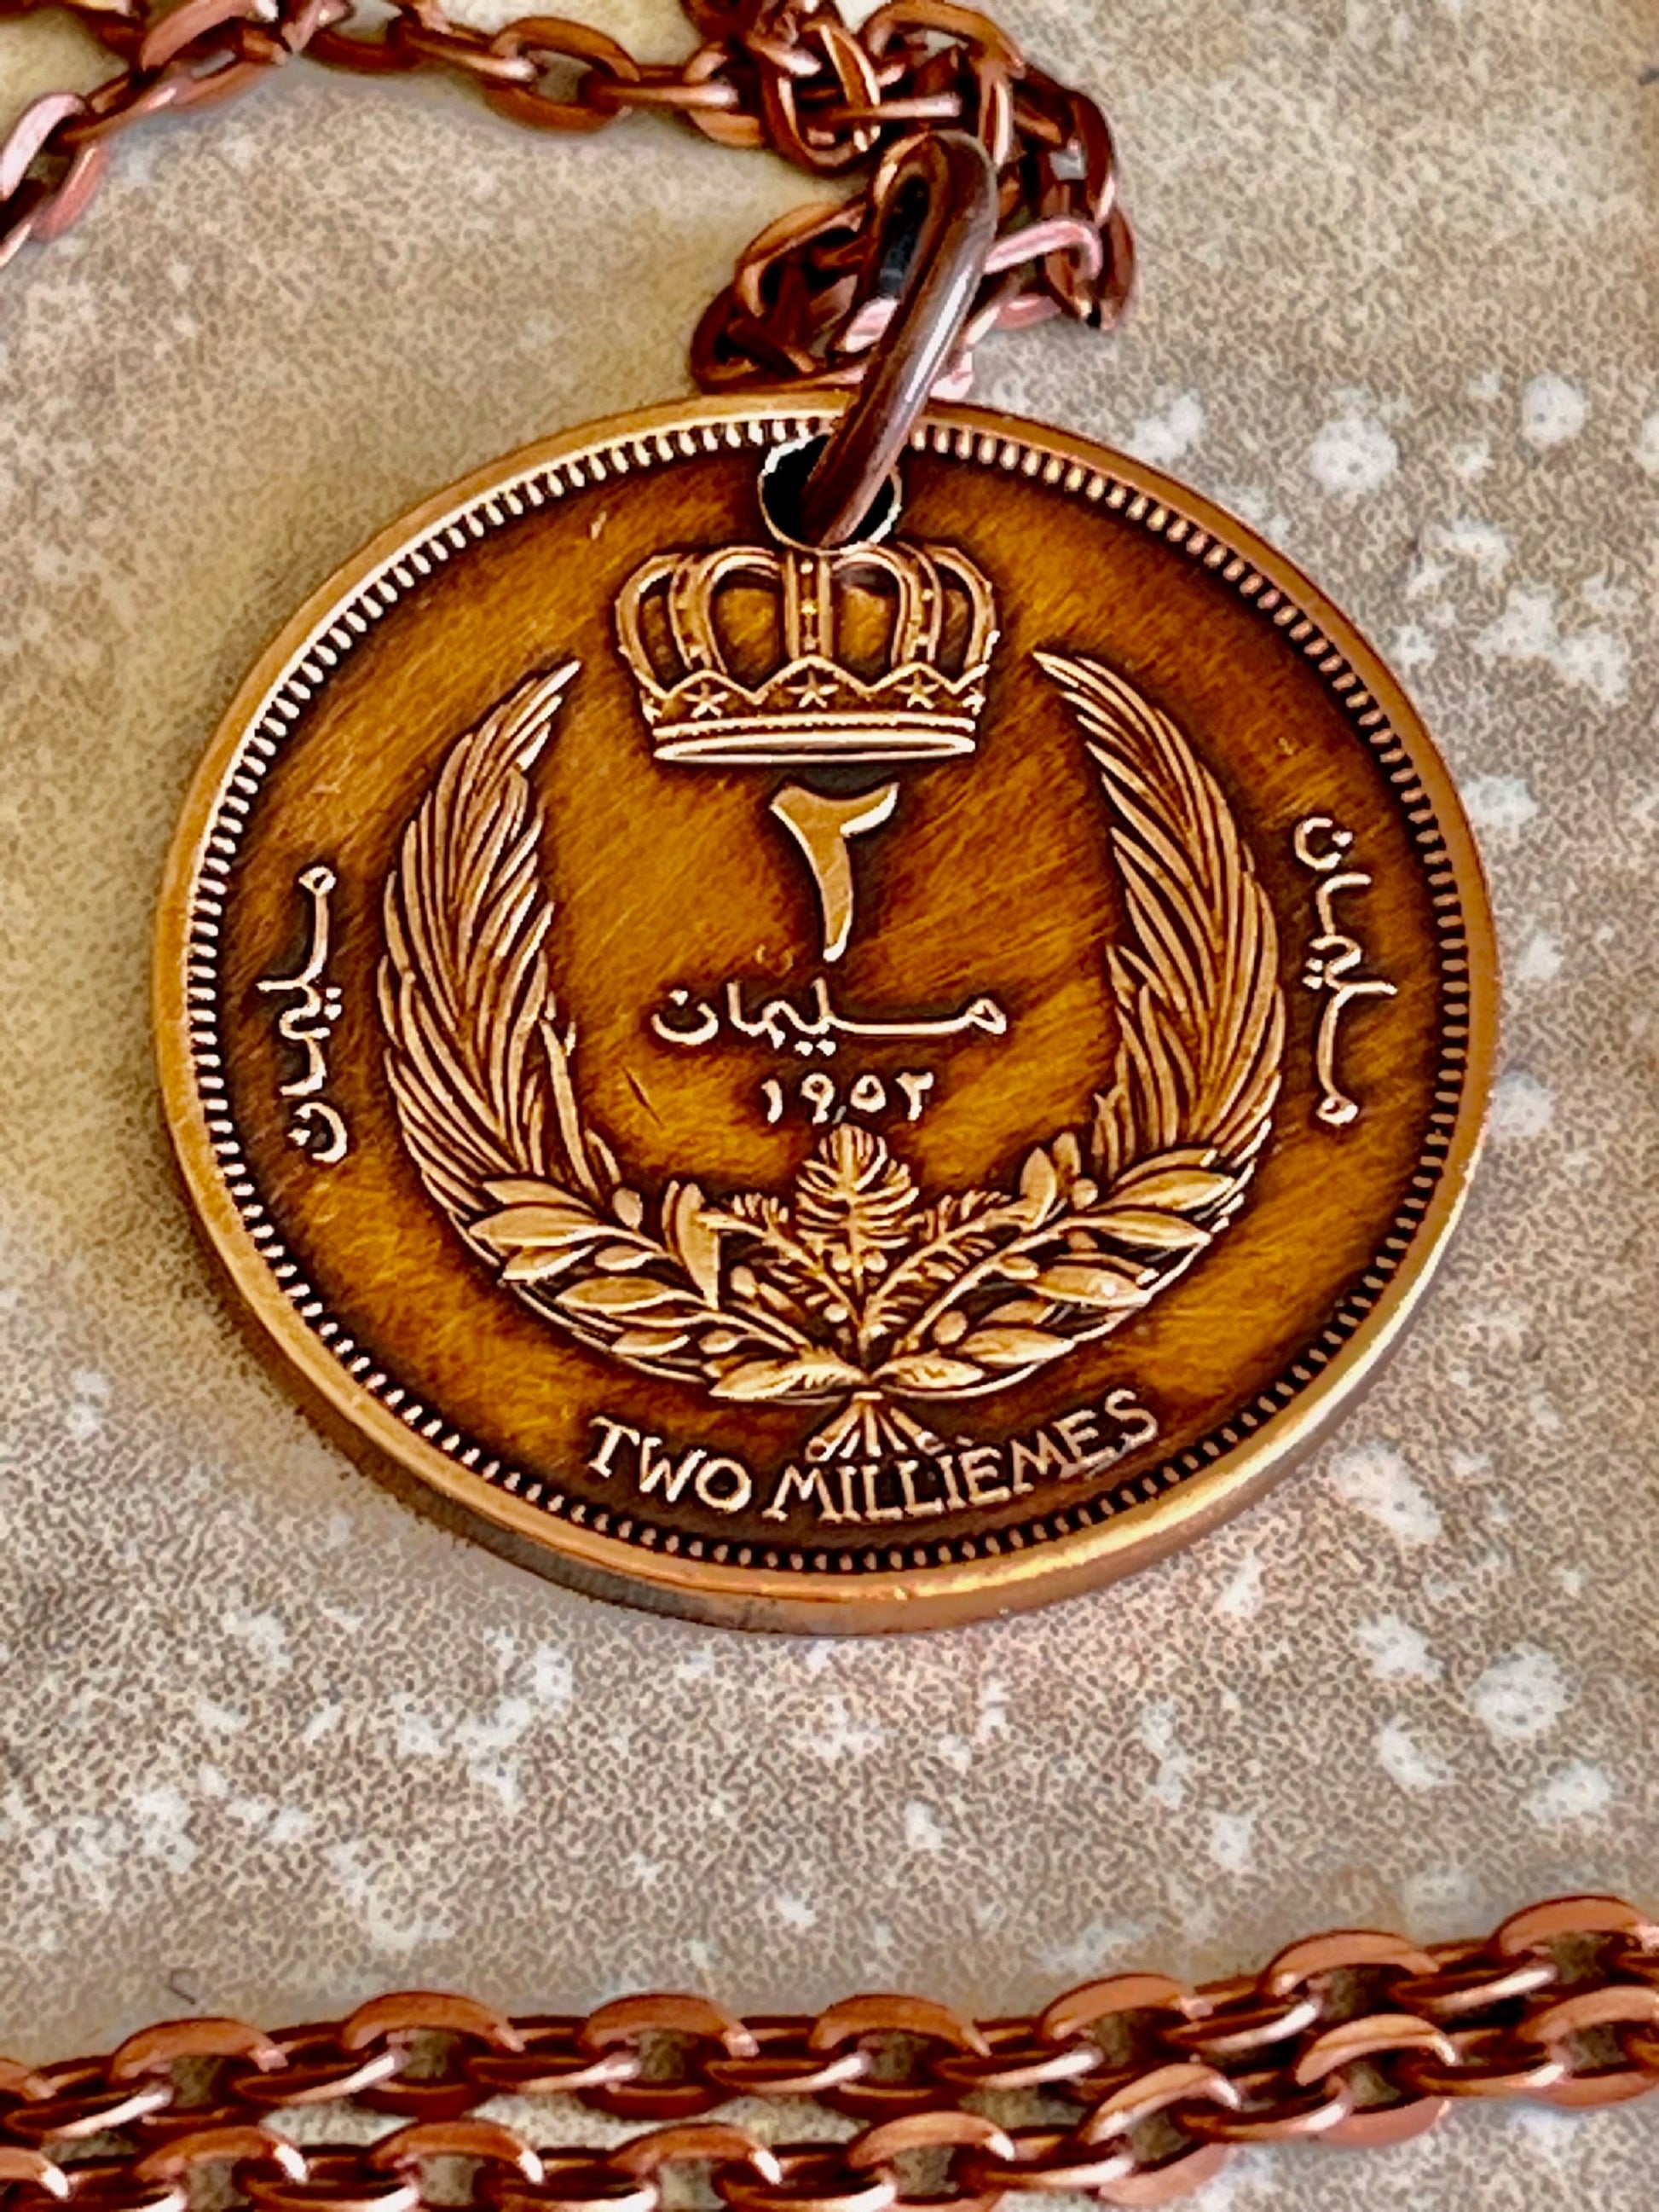 Libya Coin Pendant Libyan 2 Milliemes Personal Necklace Old Vintage Handmade Jewelry Gift Friend Charm For Him Her World Coin Collector